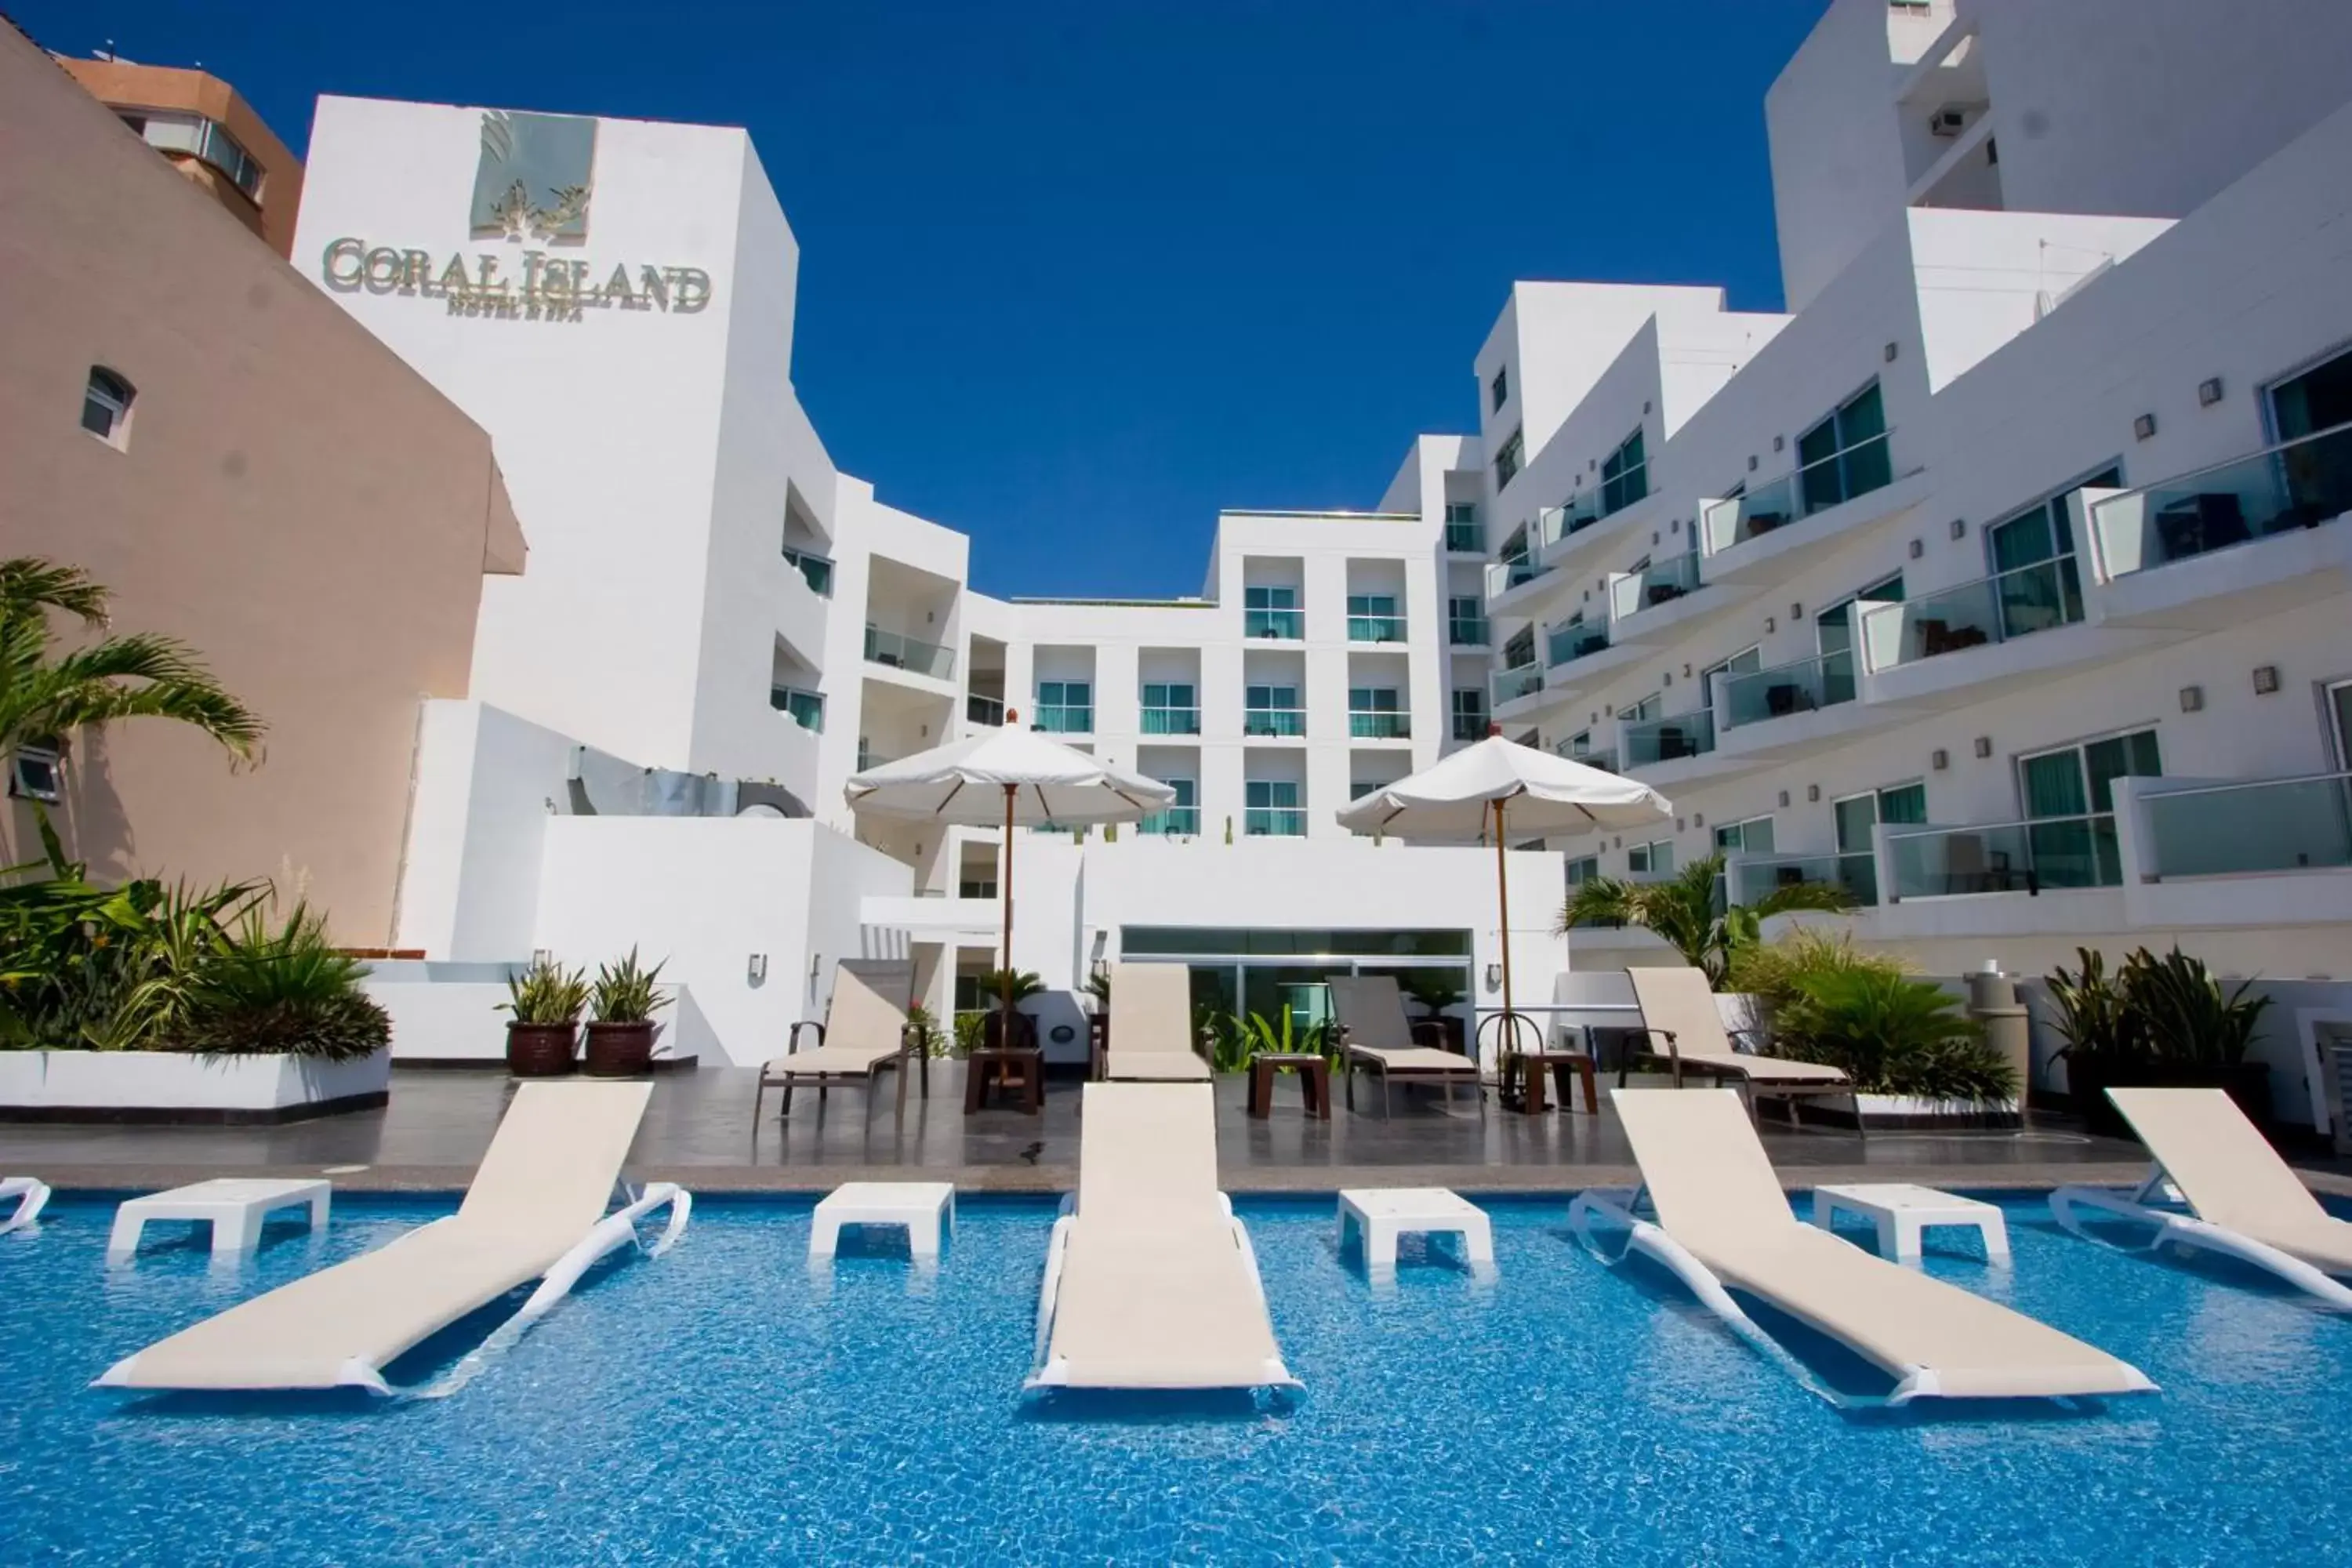 Property building, Swimming Pool in Coral Island Beach View Hotel